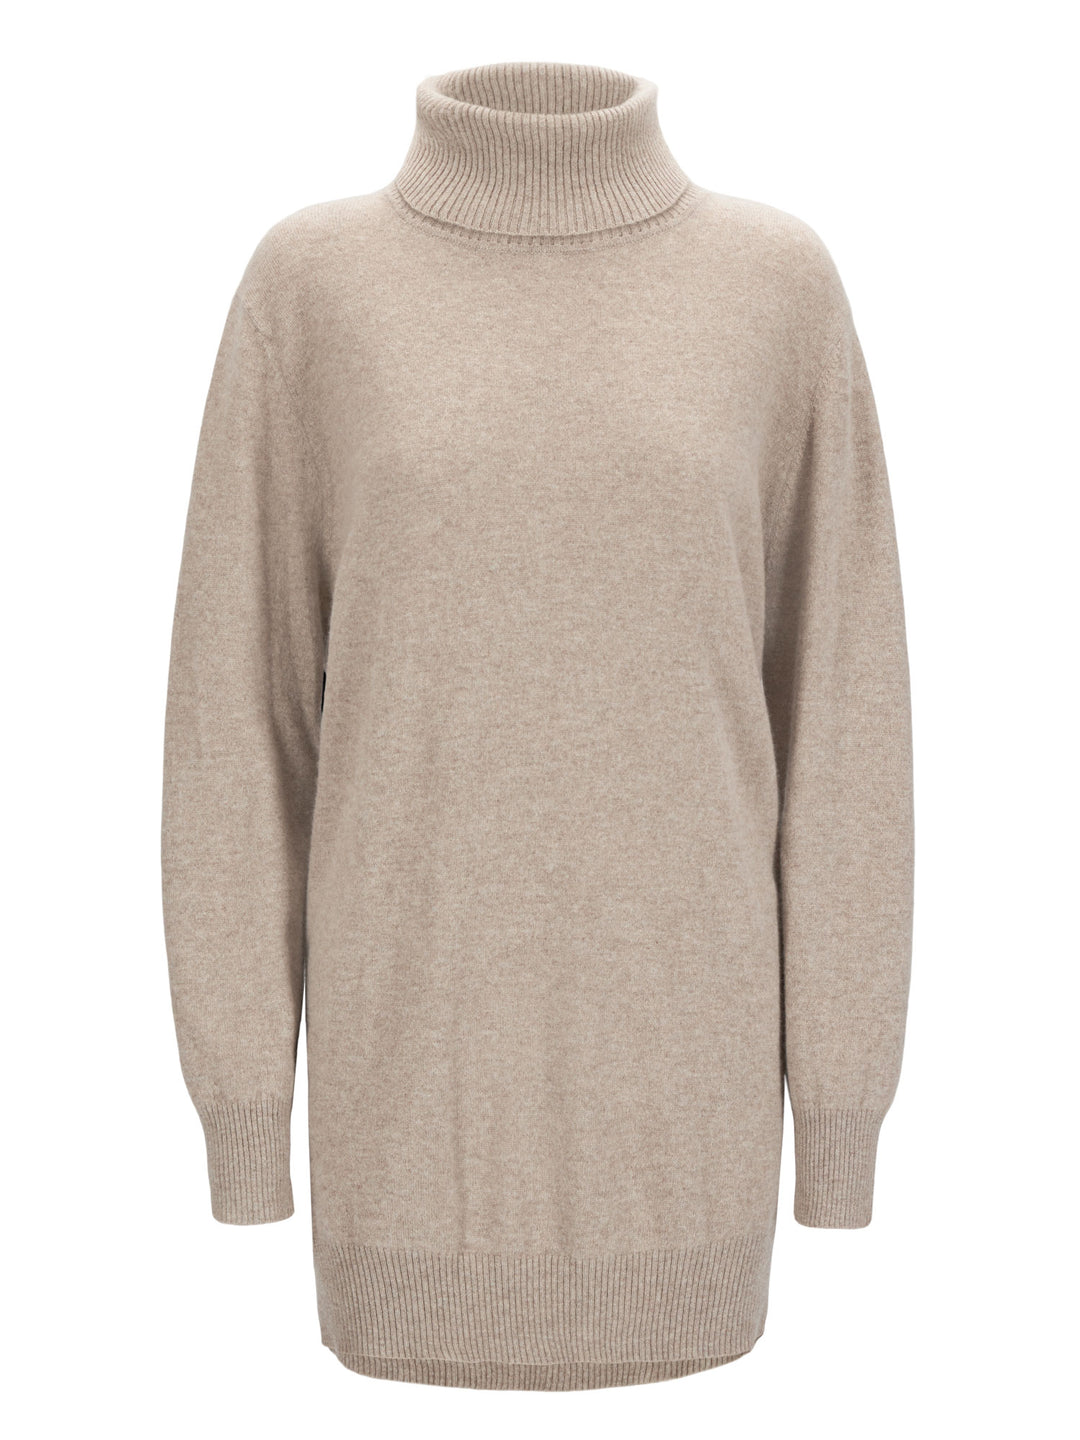 Long polo sweater in 100% pure cashmere. Scandinavian design by Kashmina. Color: Toast.